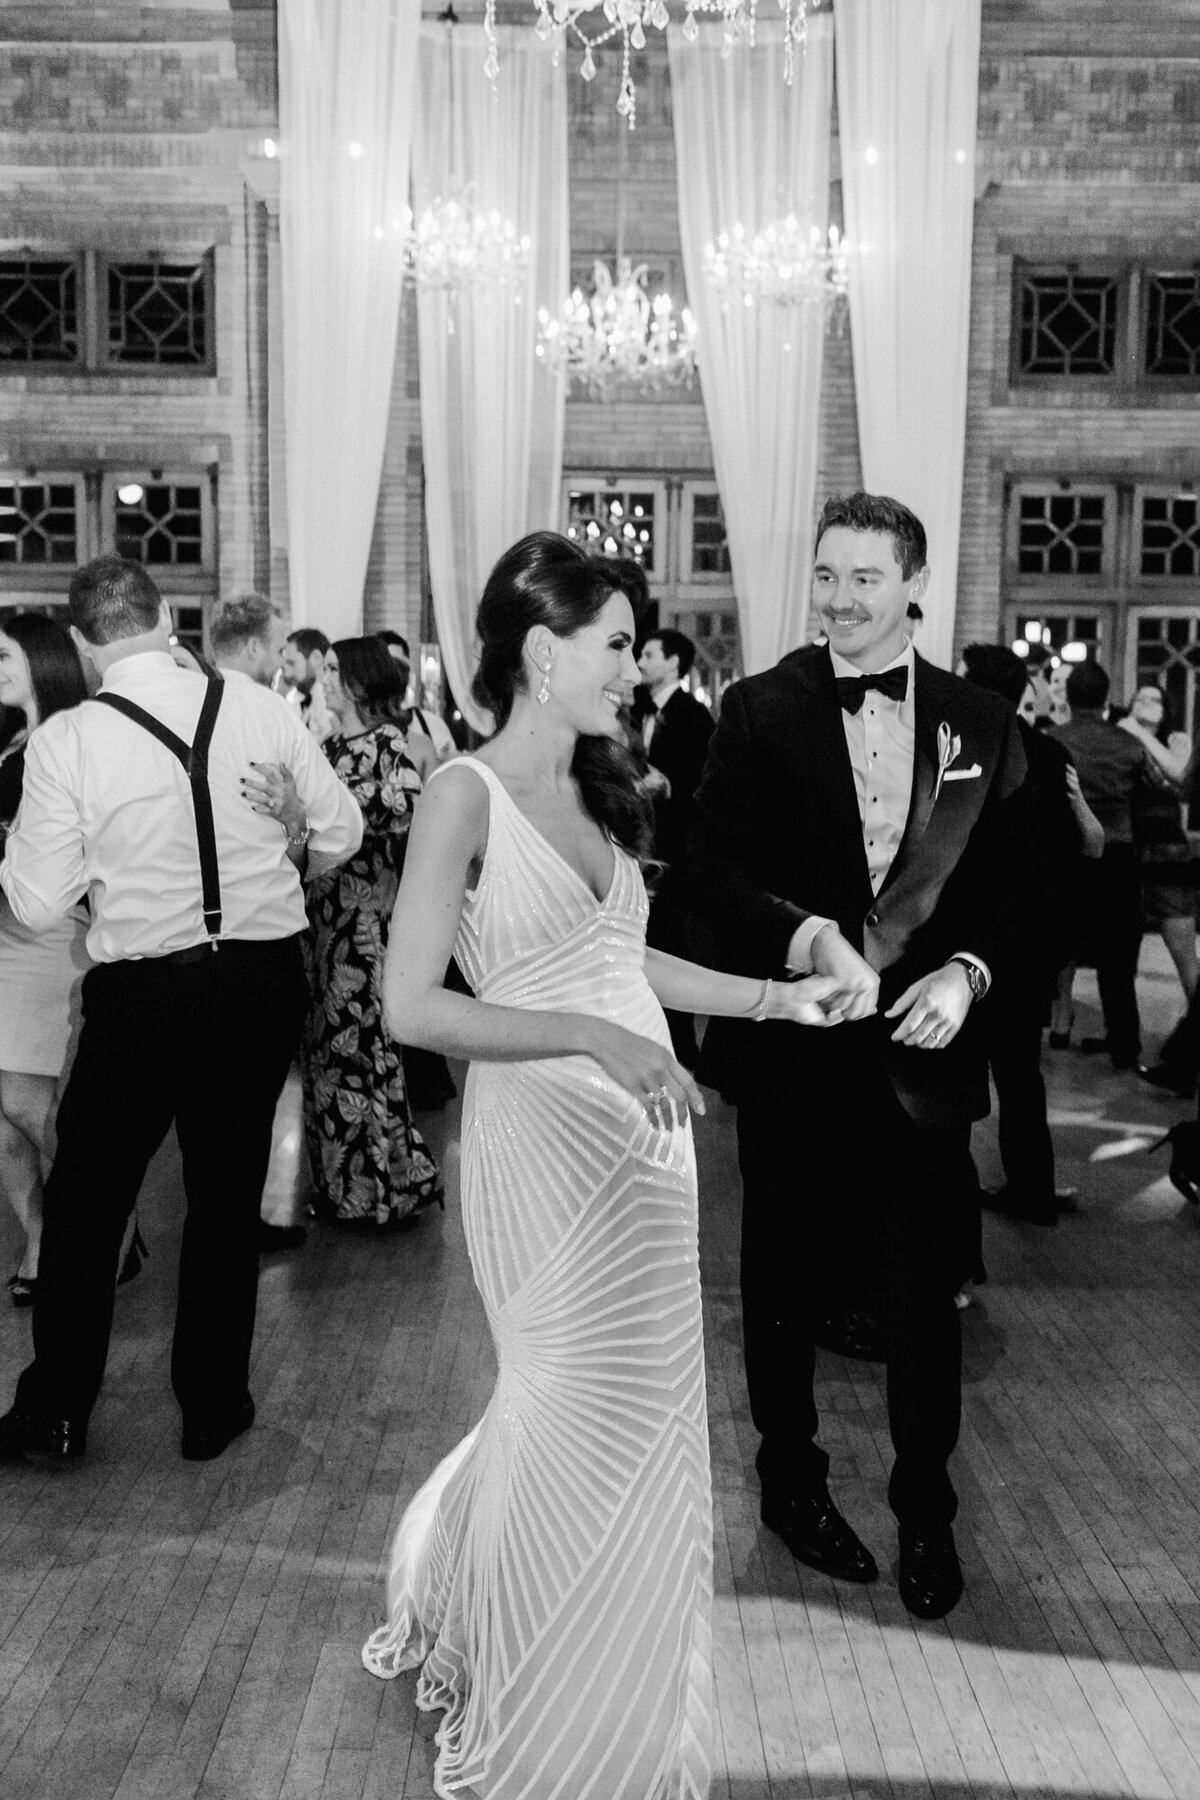 A candid moment on the dance floor of a wedding reception at Cafe Brauer in Chicago